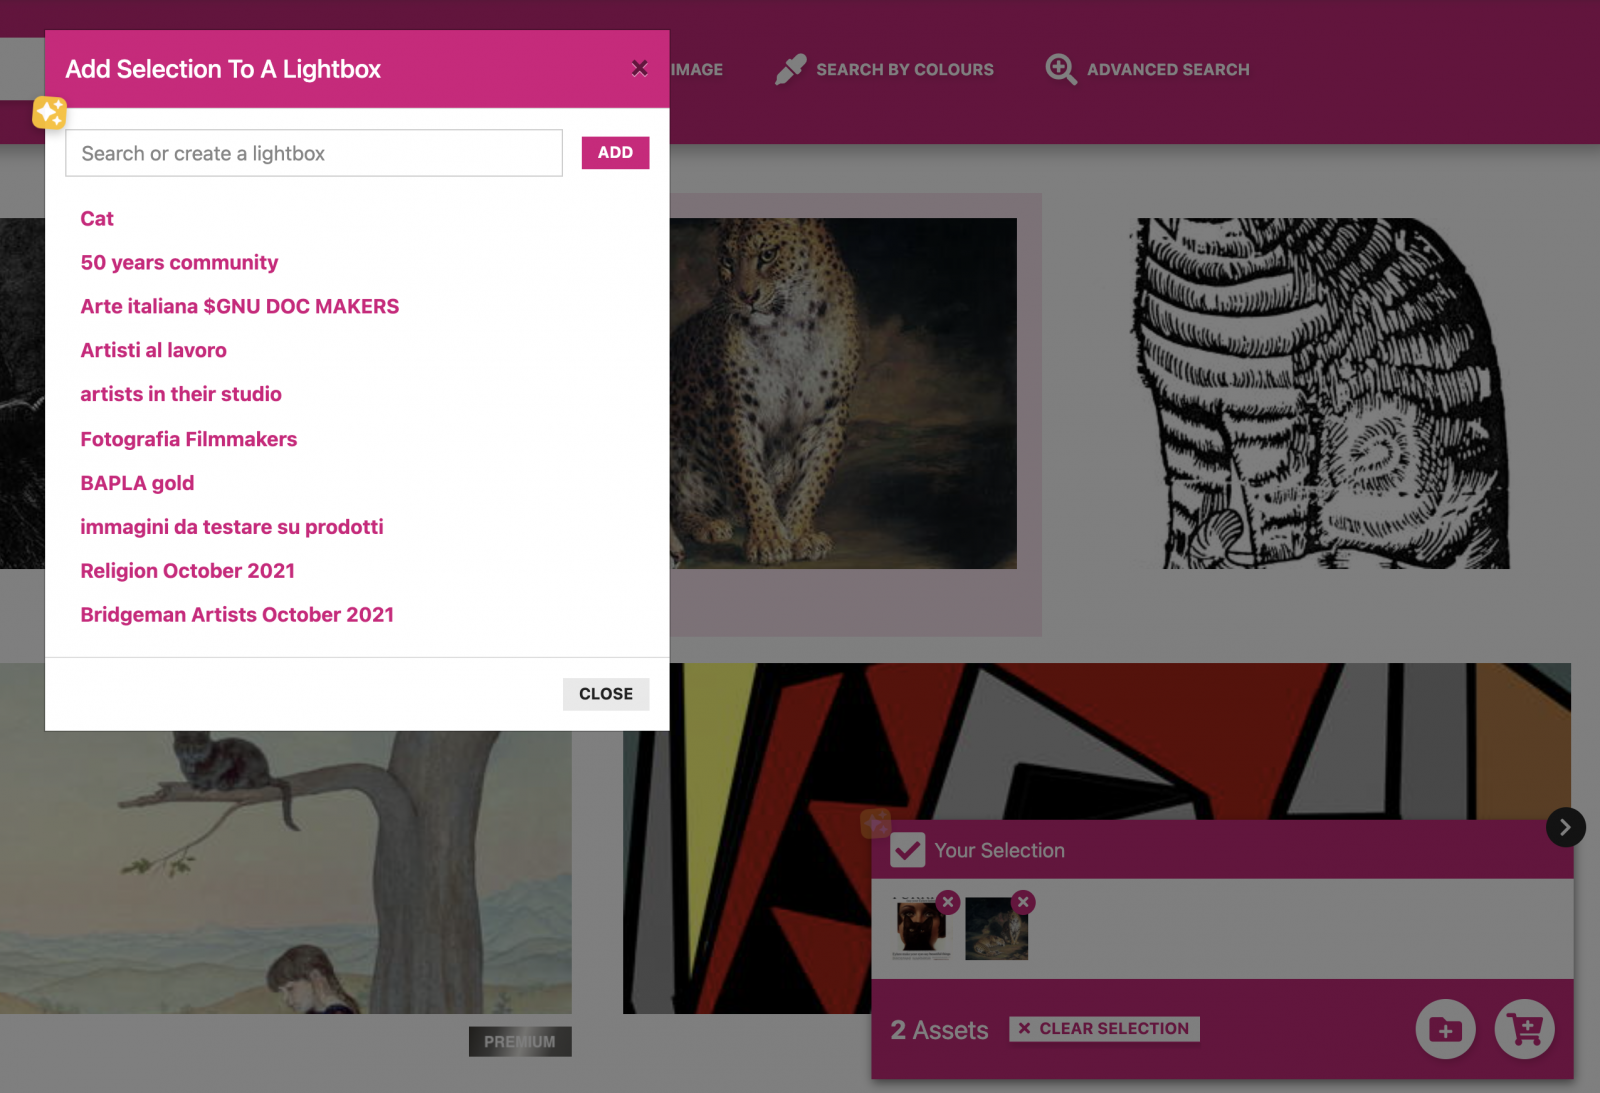 click on an image/video and then go through to your existing list of lightboxes